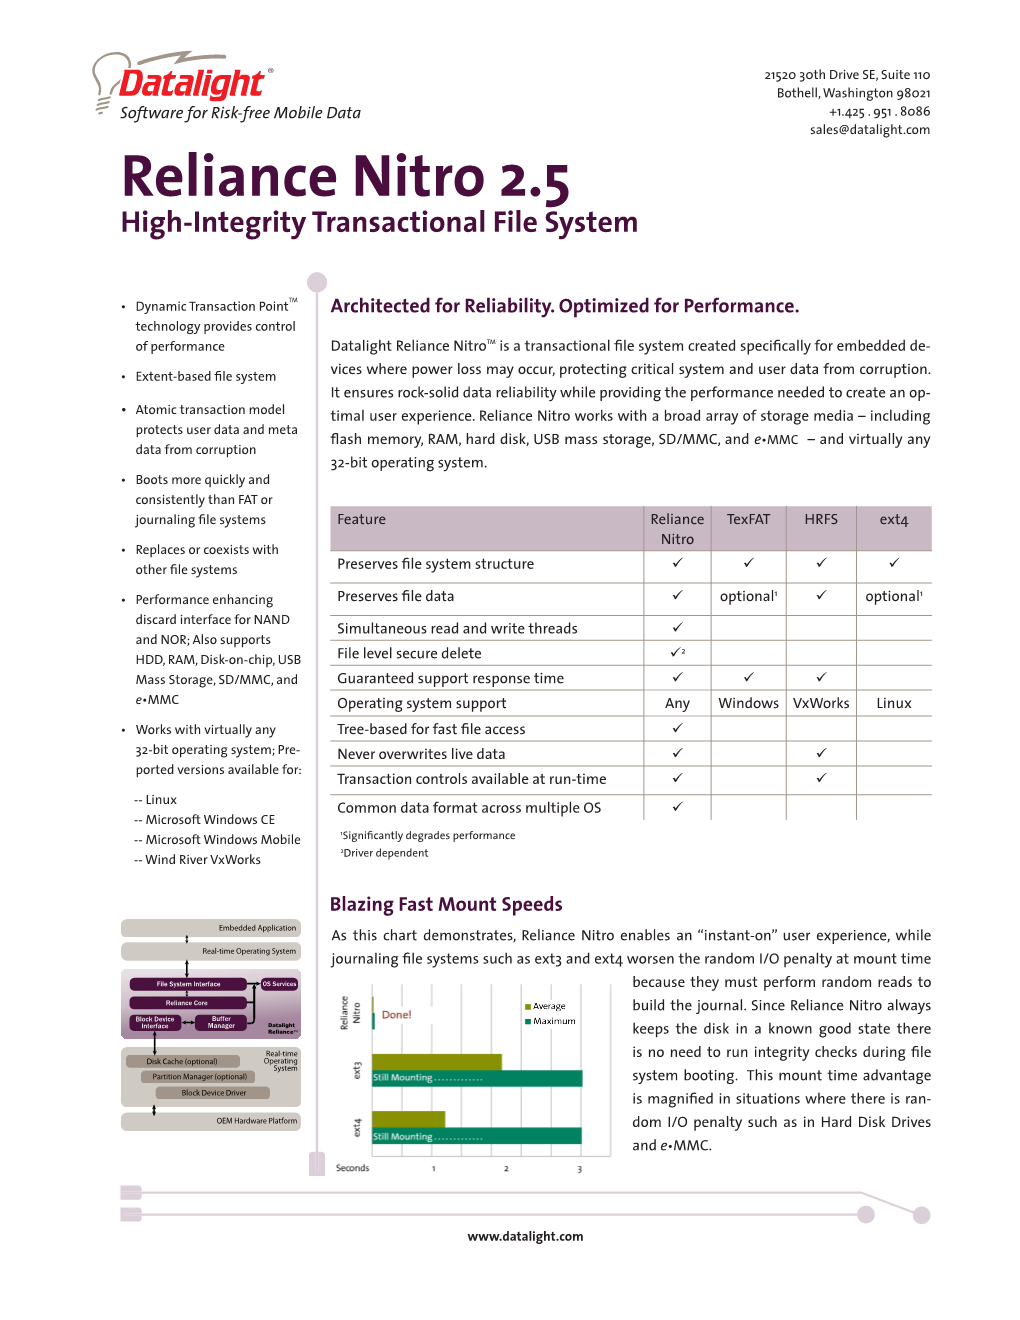 Reliance Nitro 2.5 High-Integrity Transactional File System